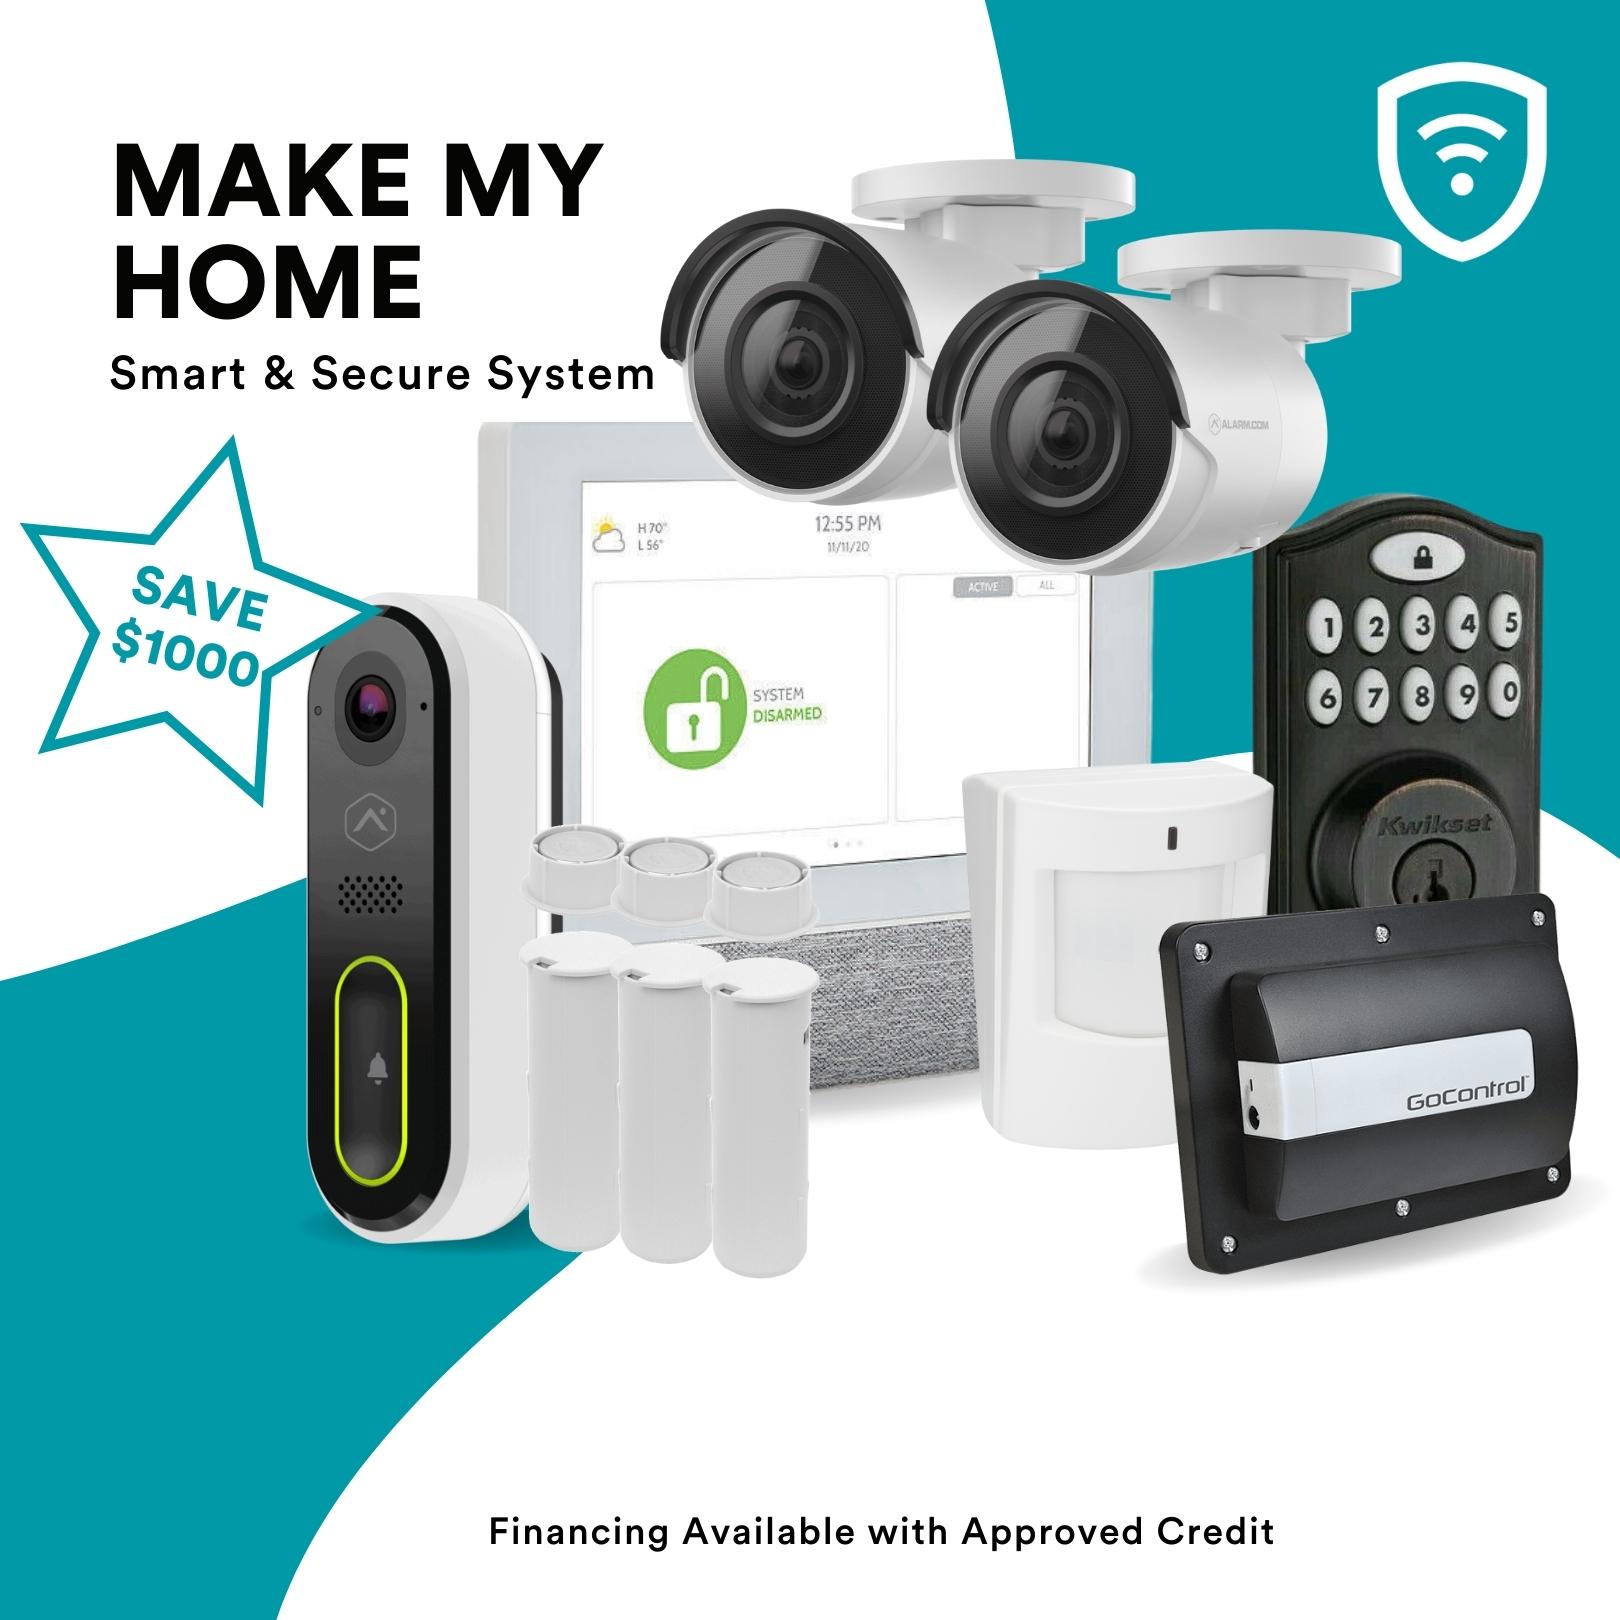 Make My Home Smart & Secure System